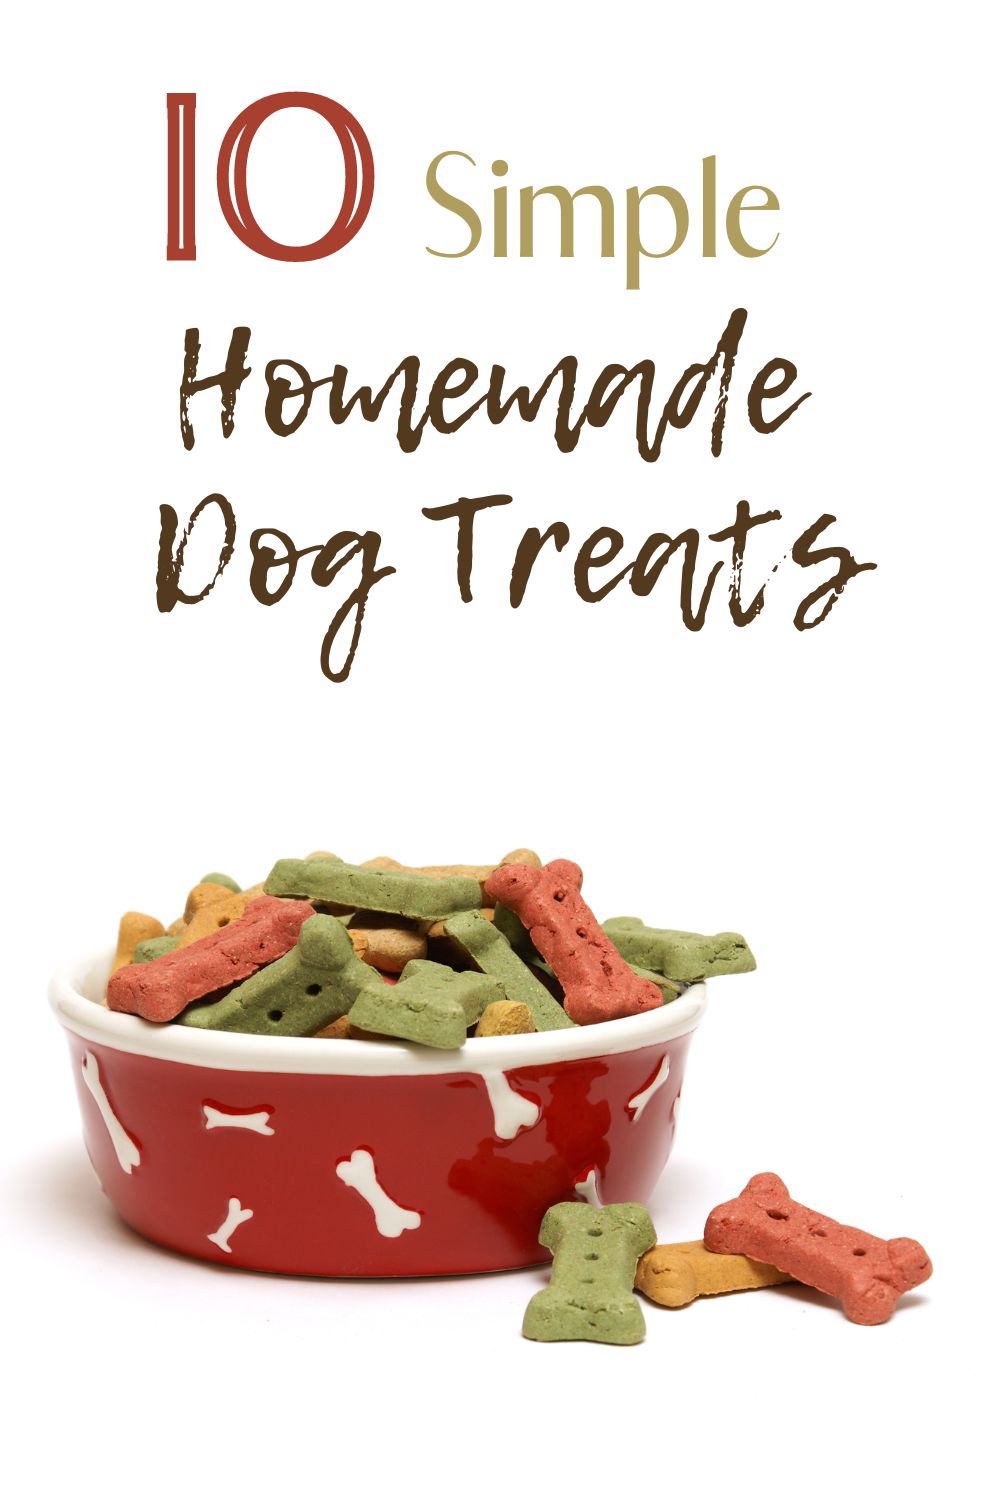 Here's a roundup of 10 easy homemade dog treat recipes to help keep your dog energetic and strong.